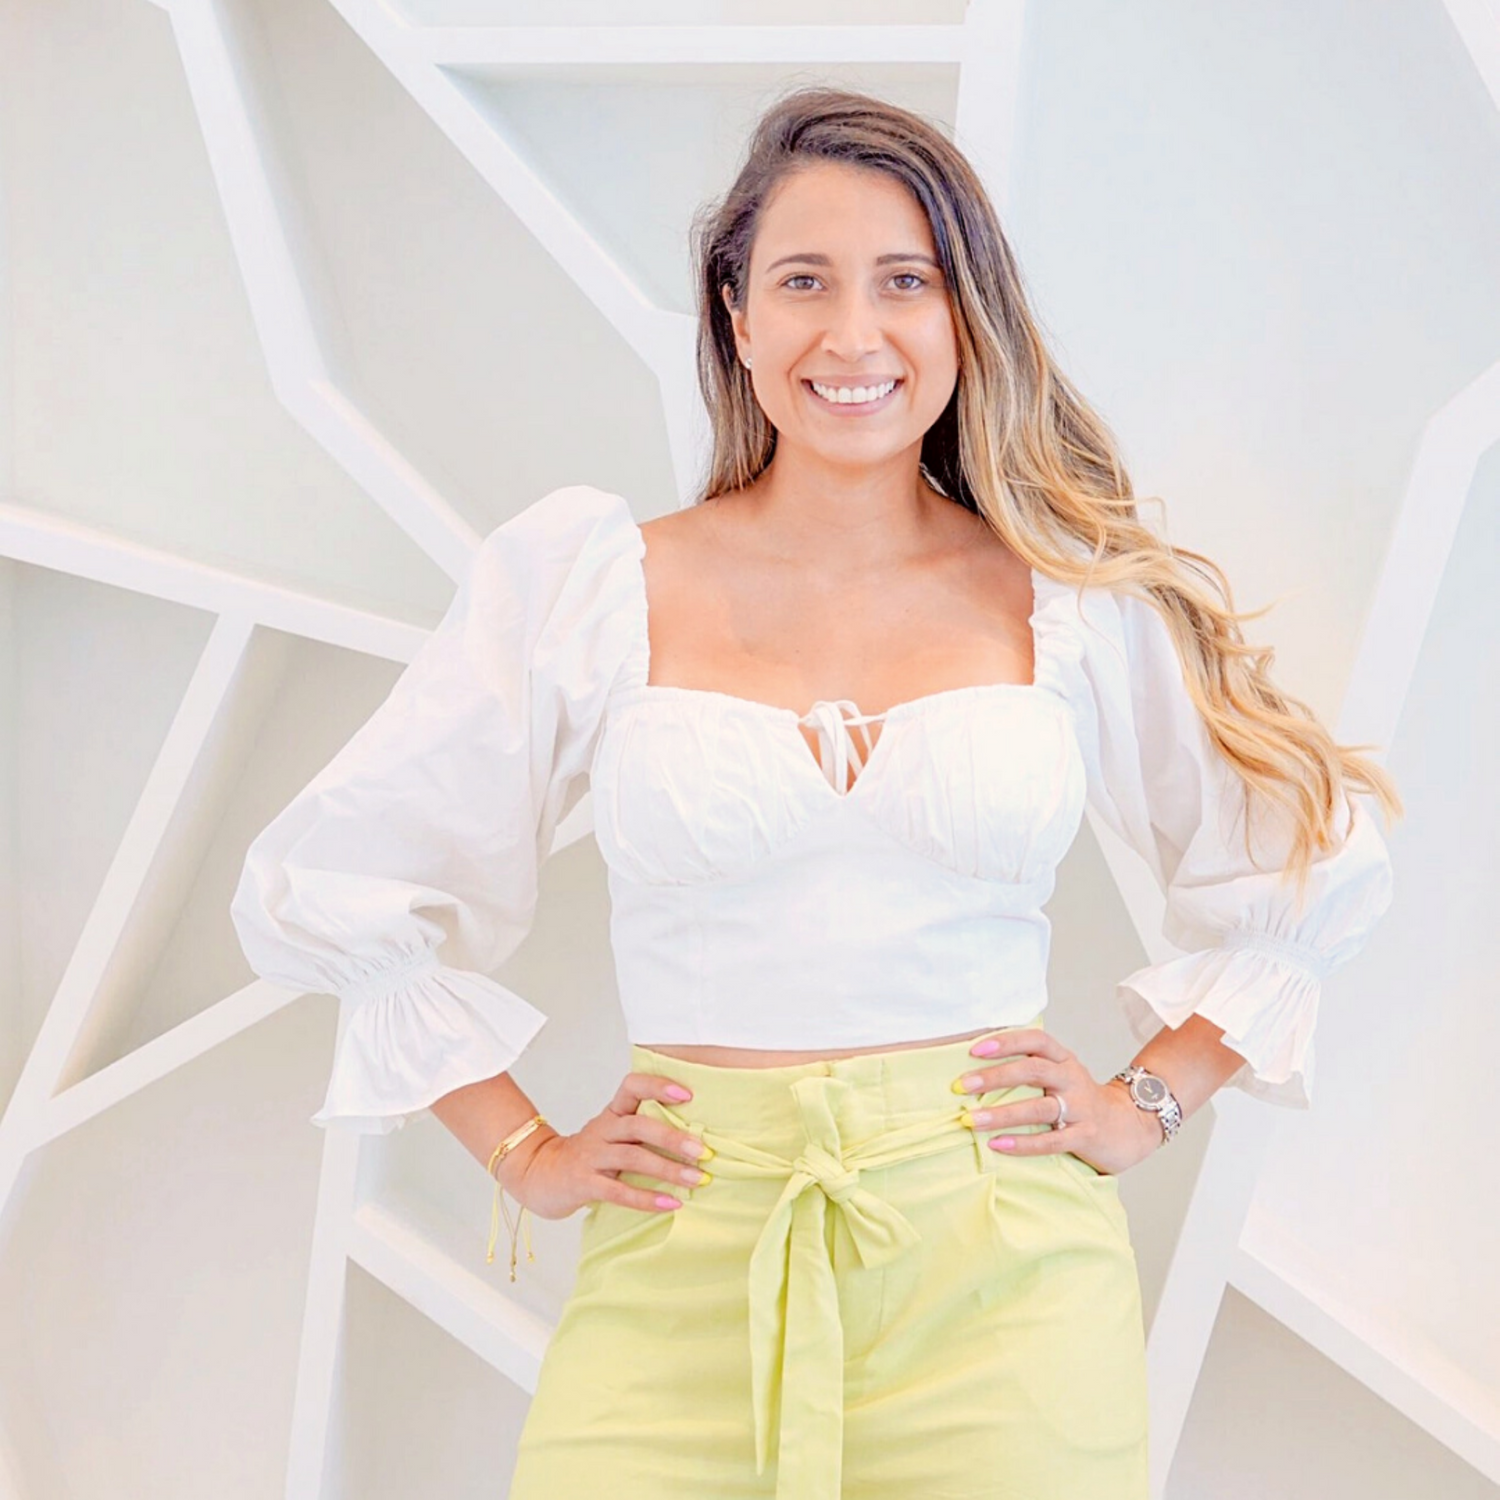 Jenni is wearing the White Bianca top and the Adella short in lemon color by ISVI Boutique Miami 2